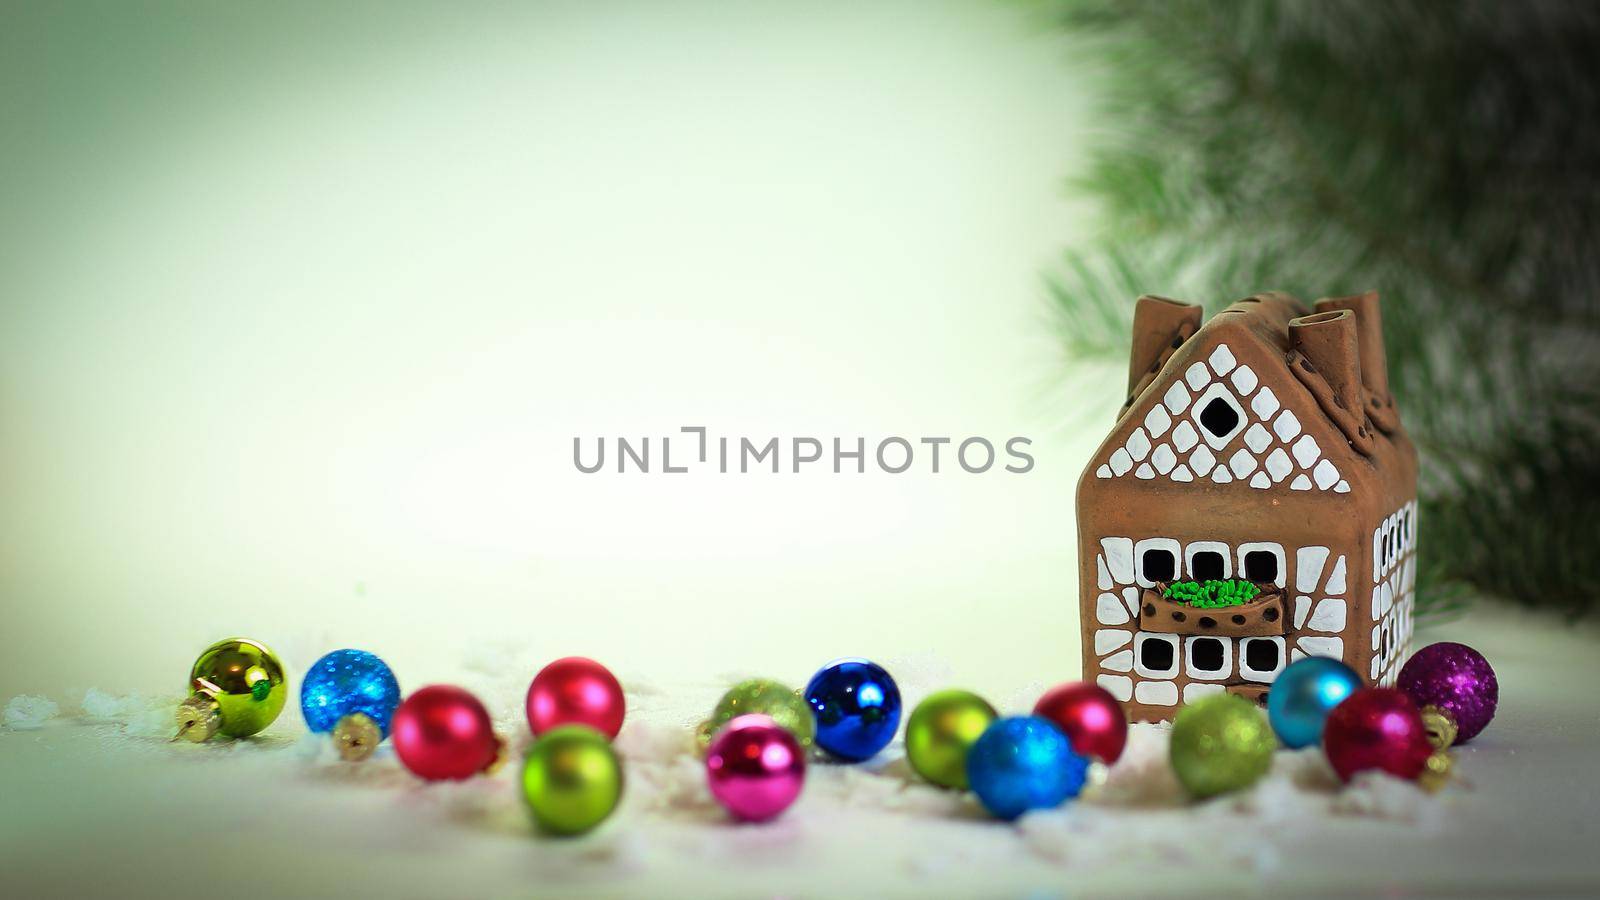 gingerbread house and gifts, at a Christmas background. photo with copy space.